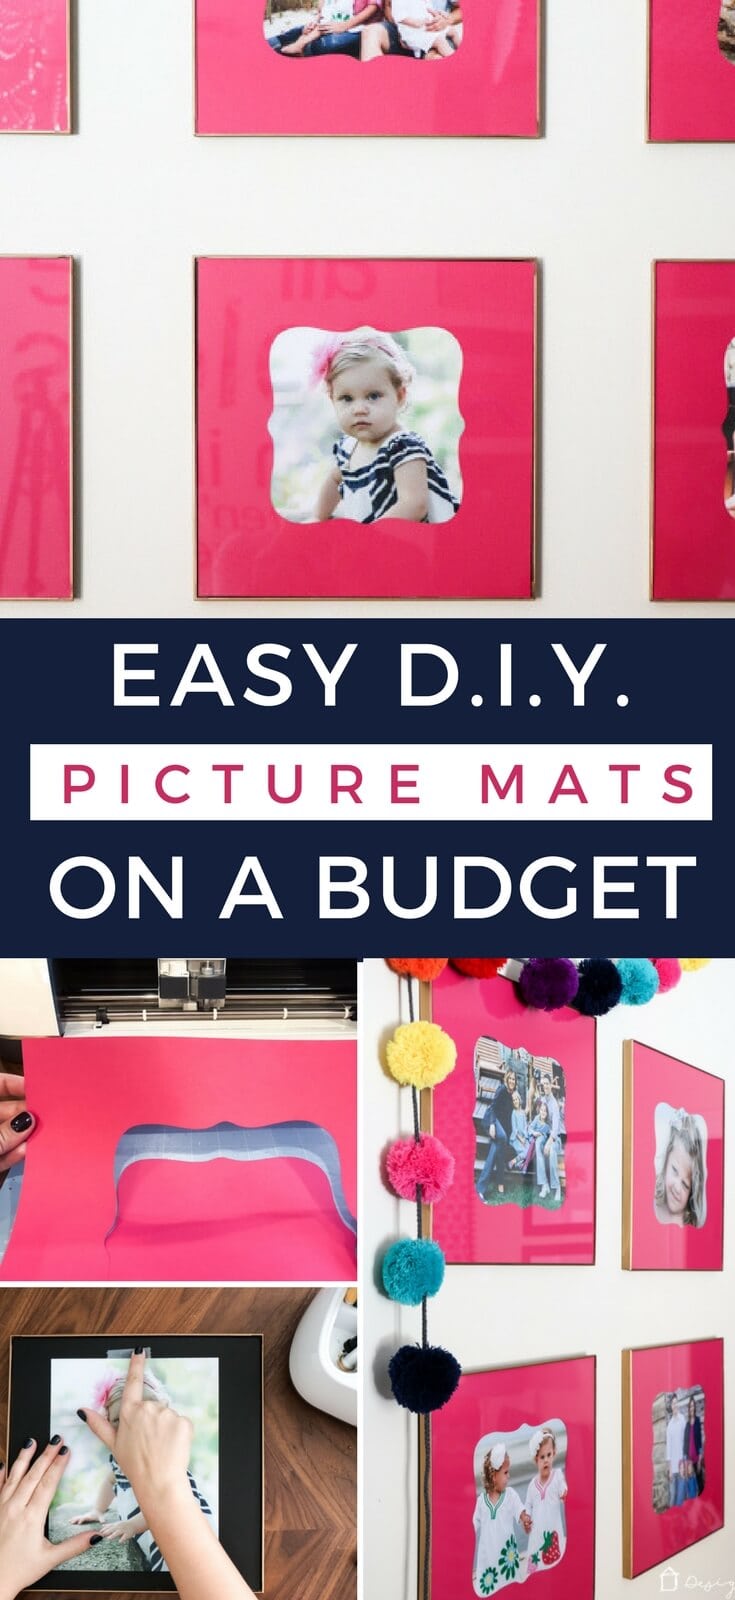 Picture mats can be expensive and custom shapes and sizes are impossible to find on store shelves. Now you can make your own DIY picture mats with this easy tutorial!